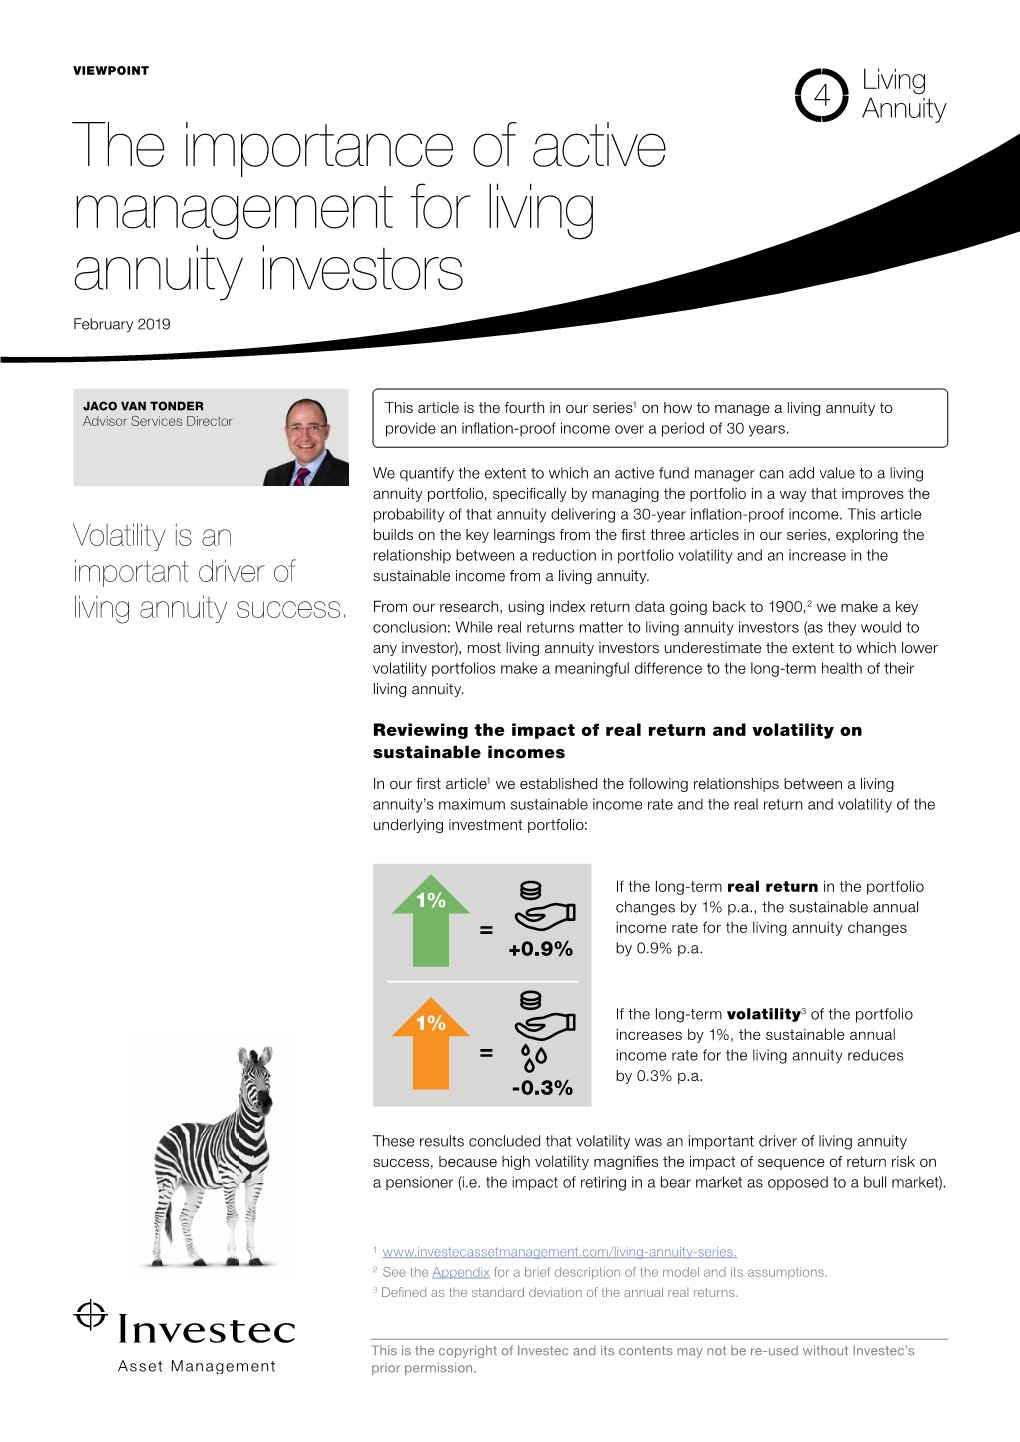 The Importance of Active Management for Living Annuity Investors February 2019